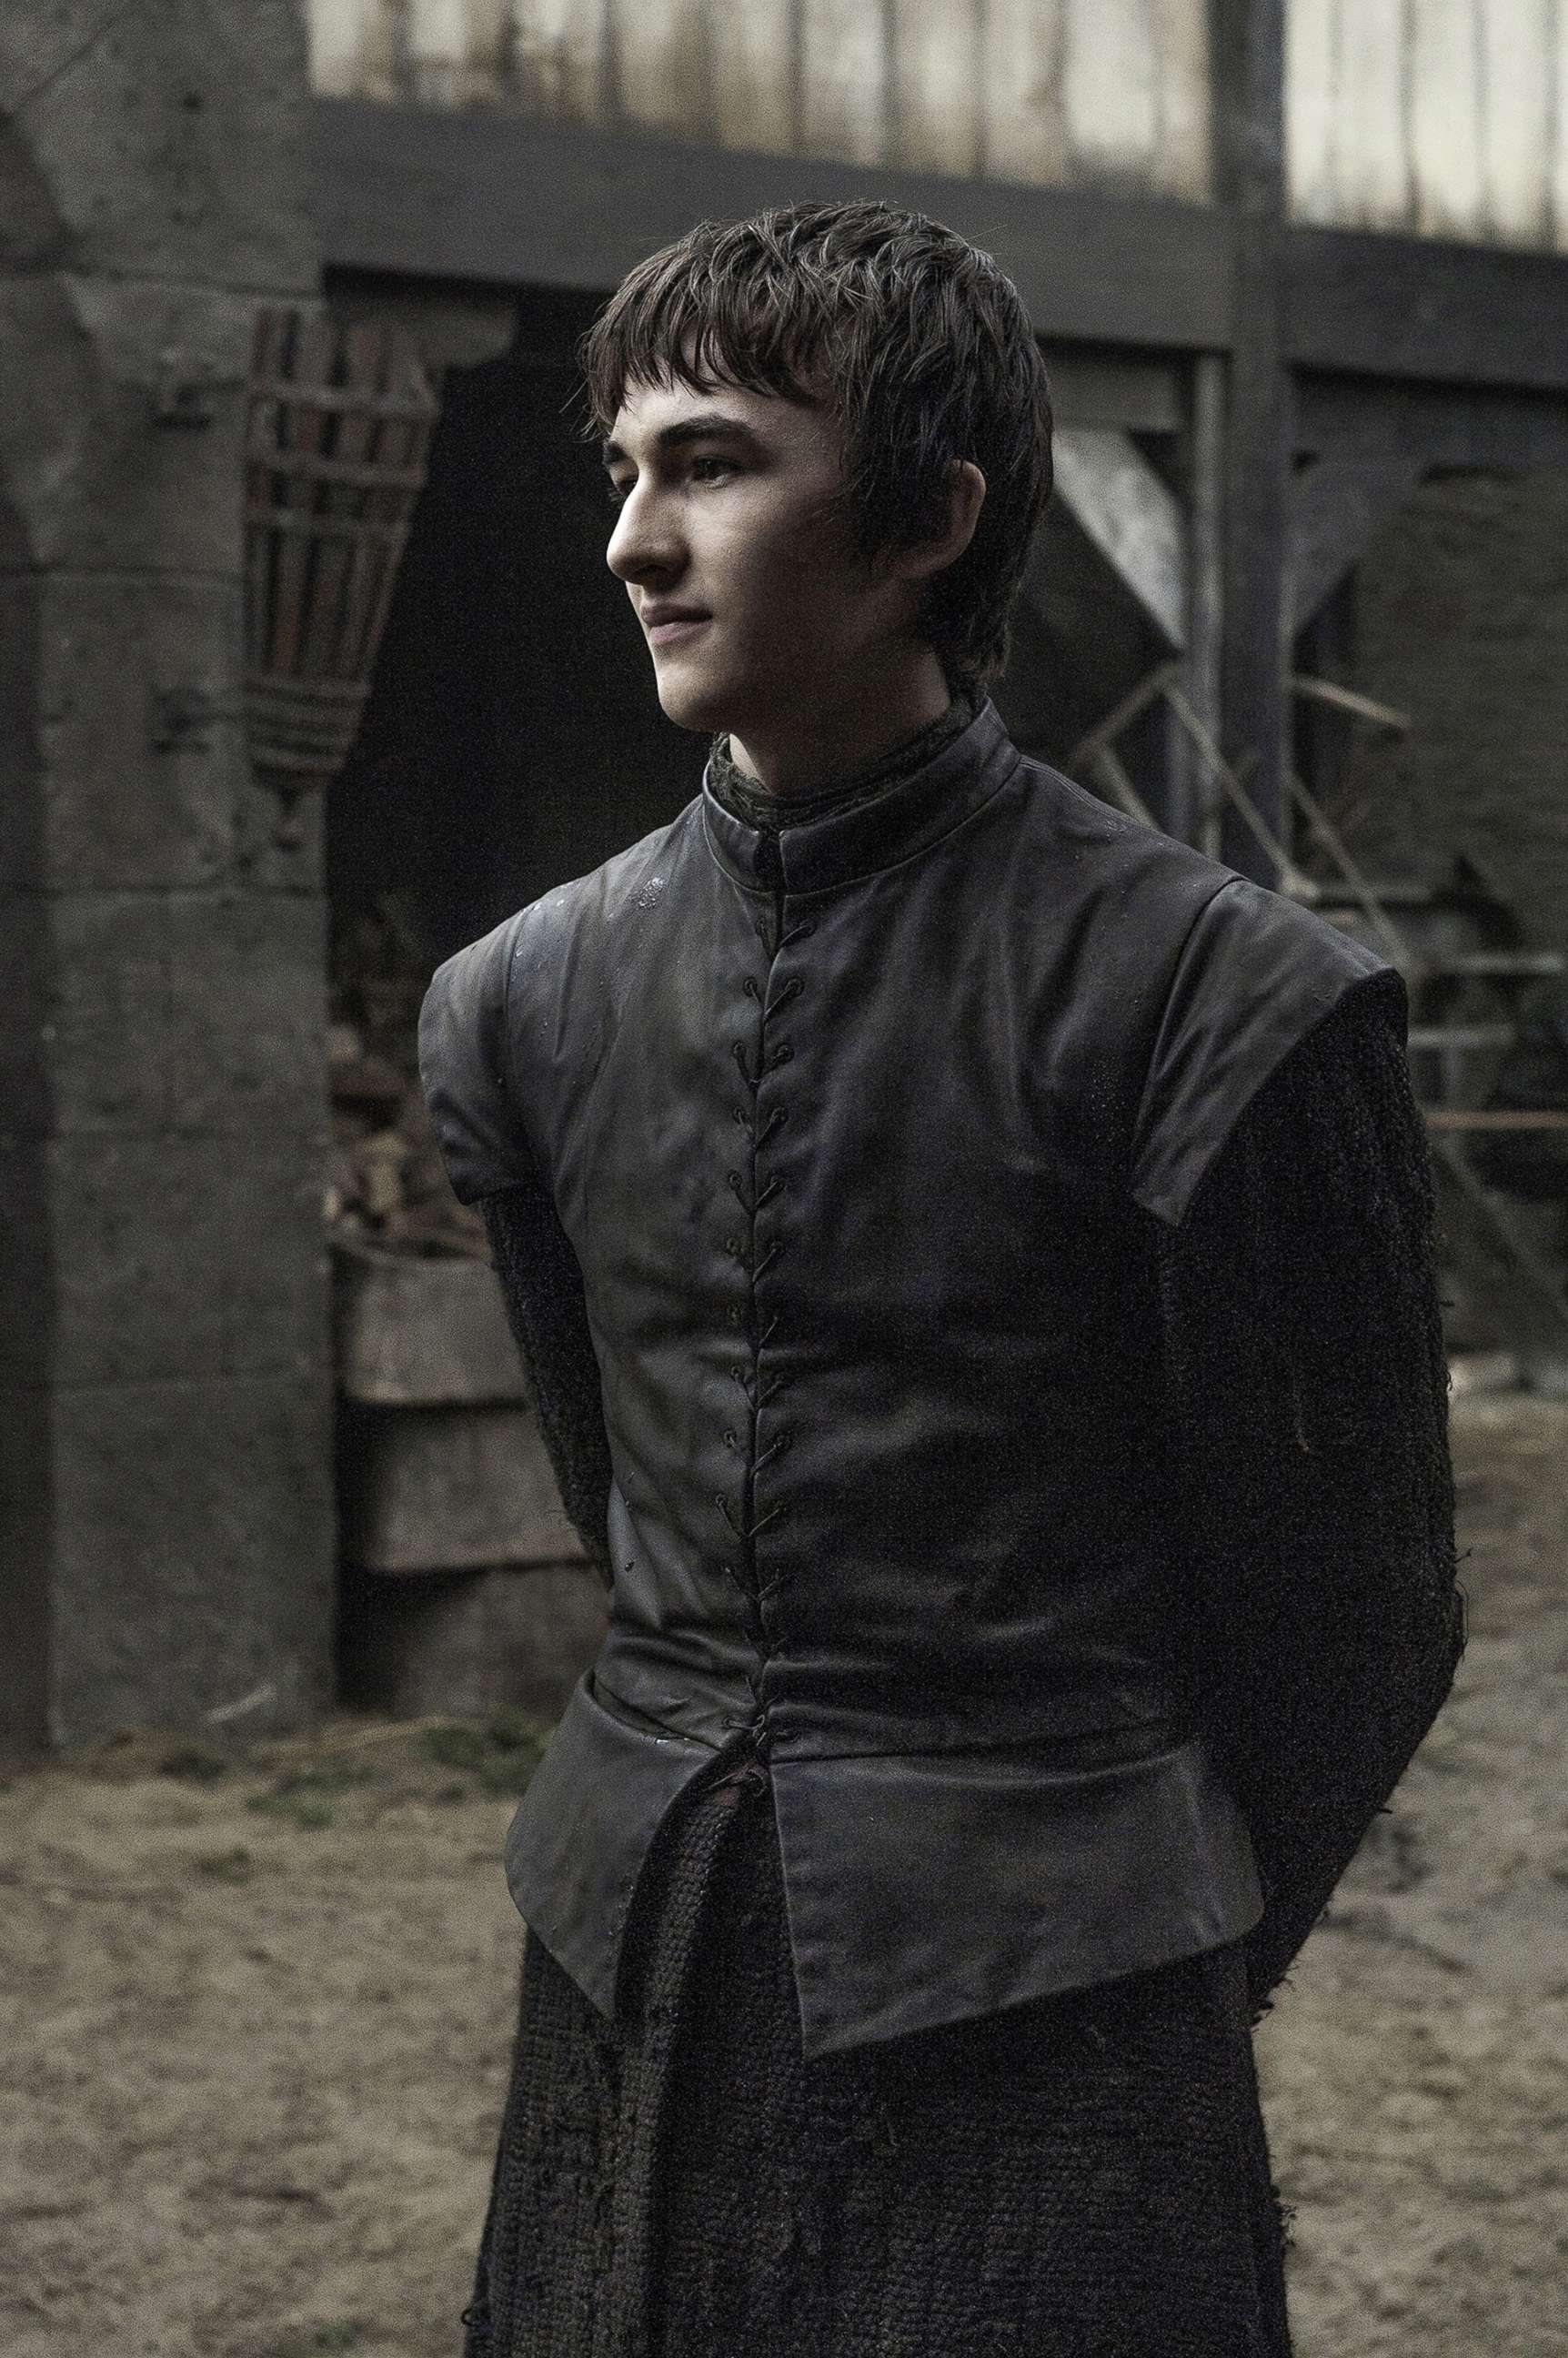 PHOTO: Isaac Hempstead Wright as Bran Stark in the "Game of thrones."